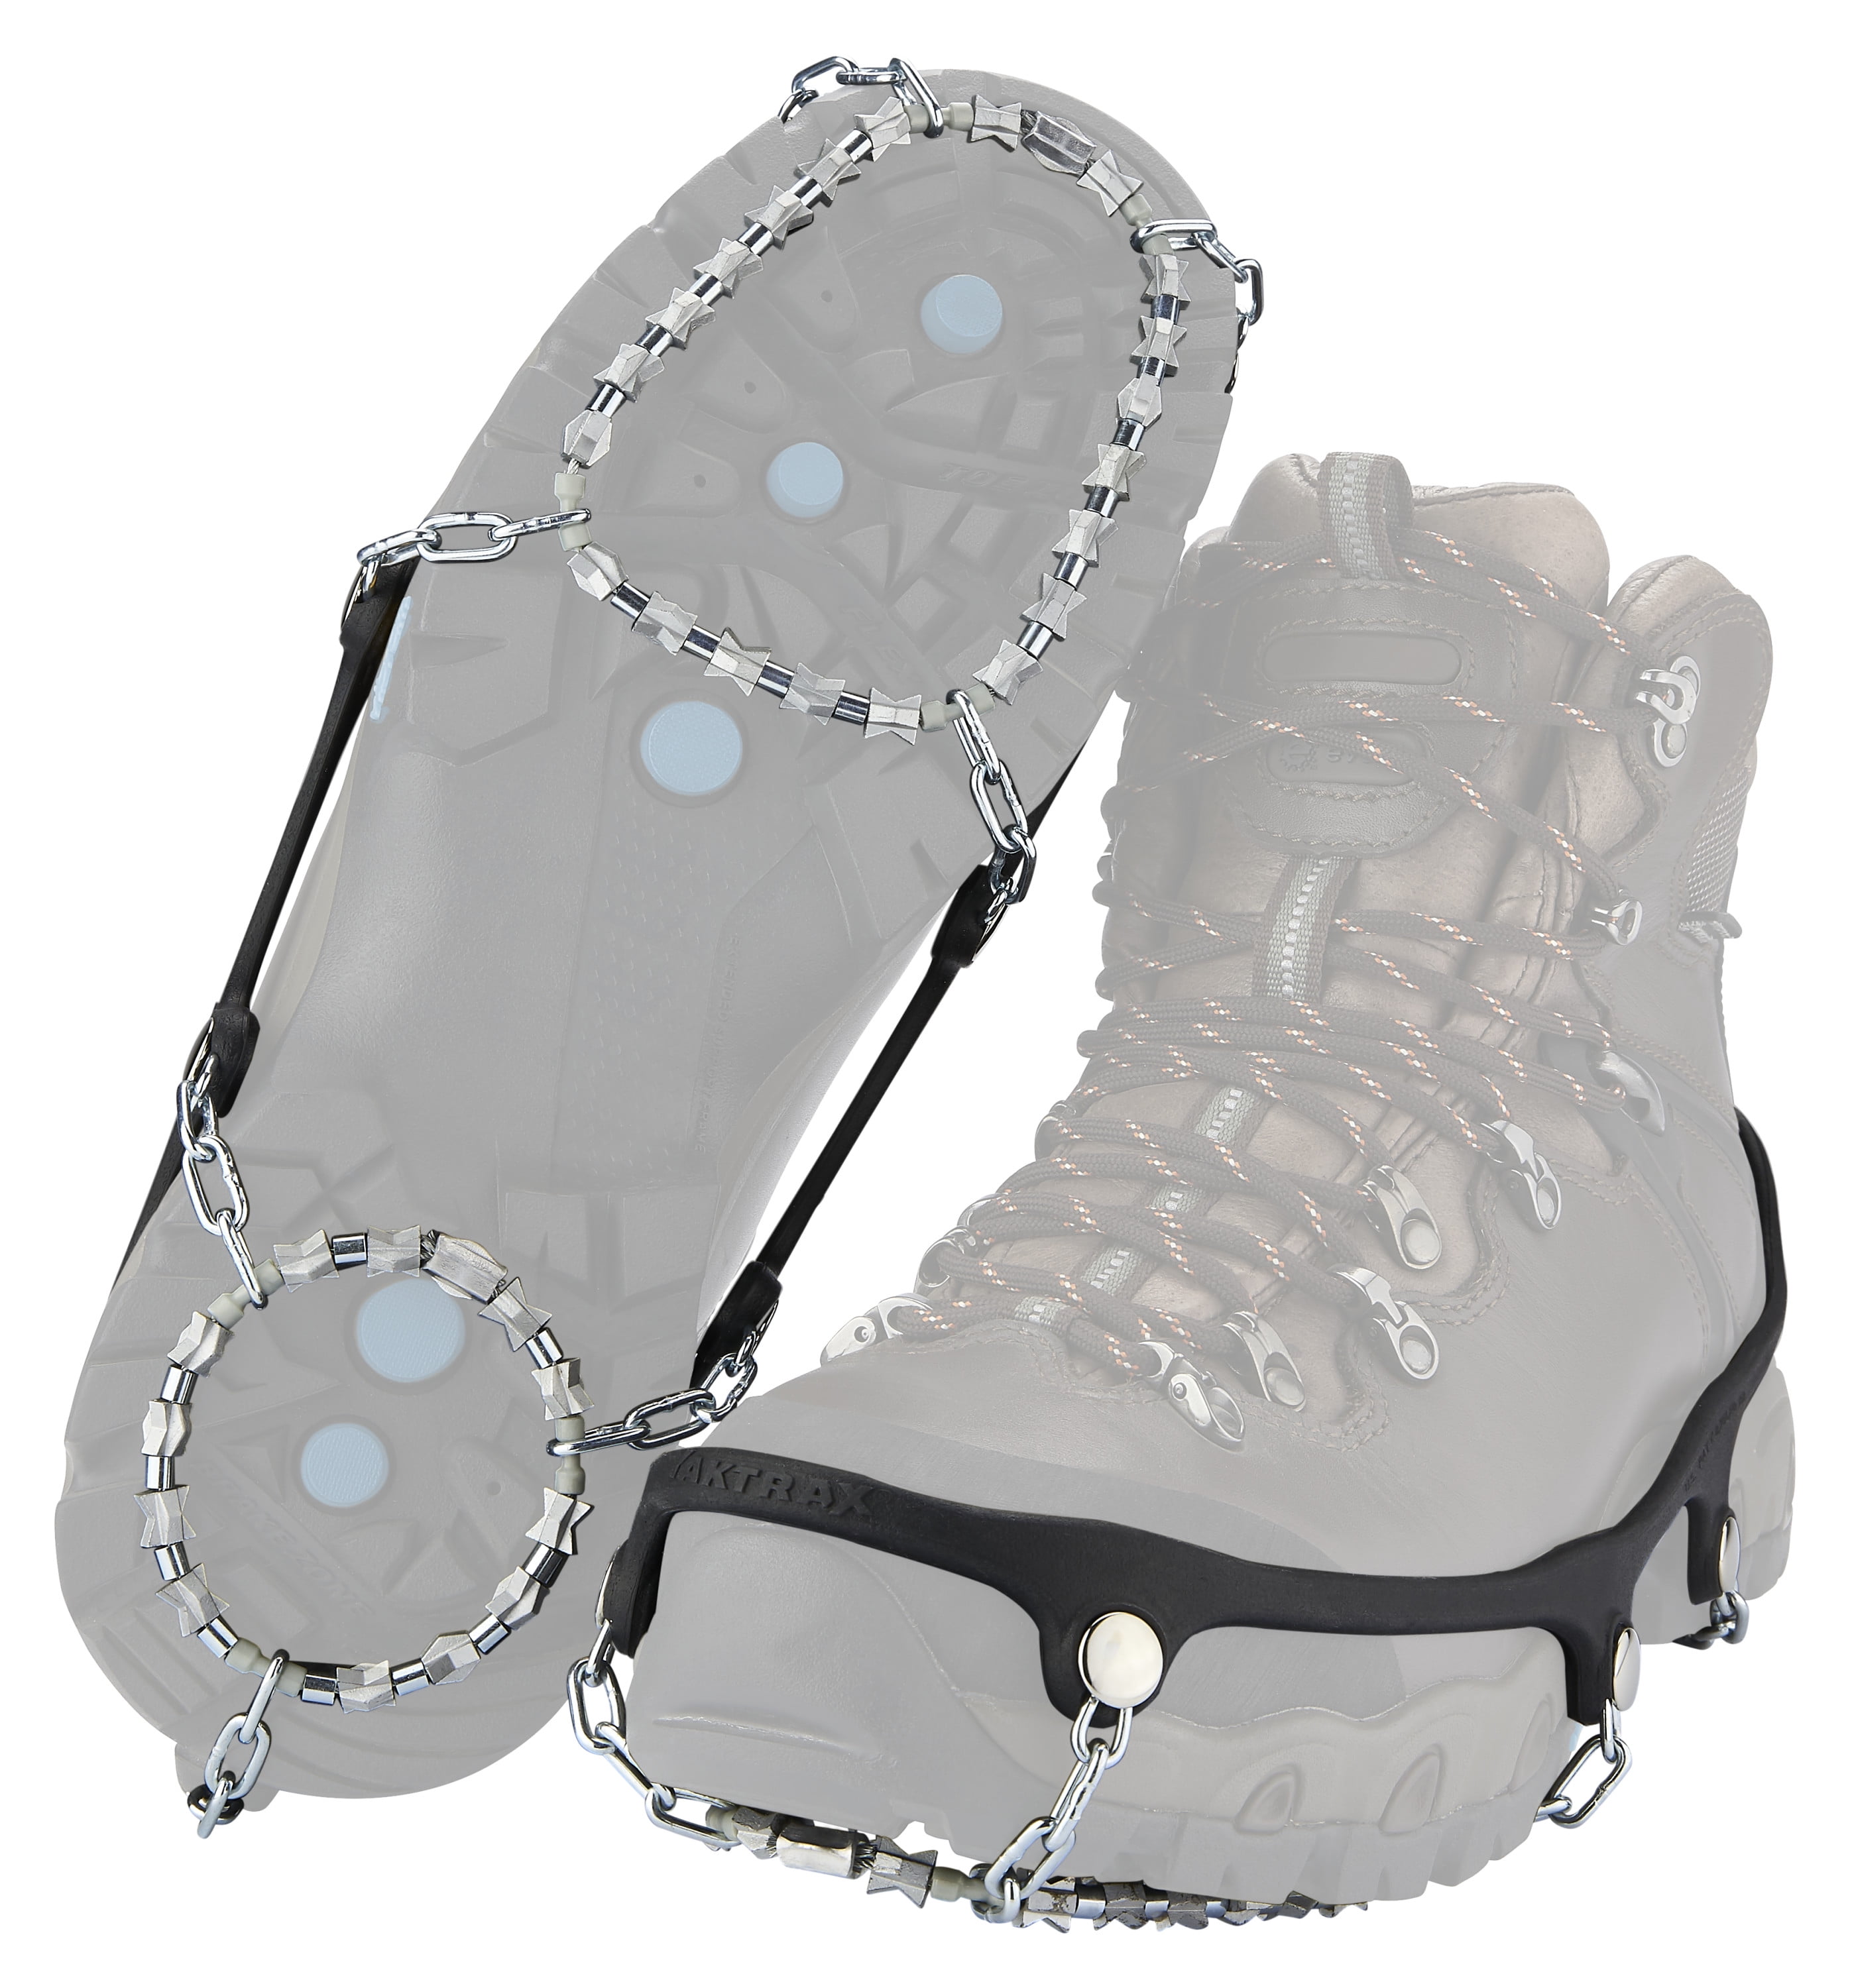 Yaktrax Diamond Grip All-Surface Traction Cleats for Walking on Ice and Snow Small